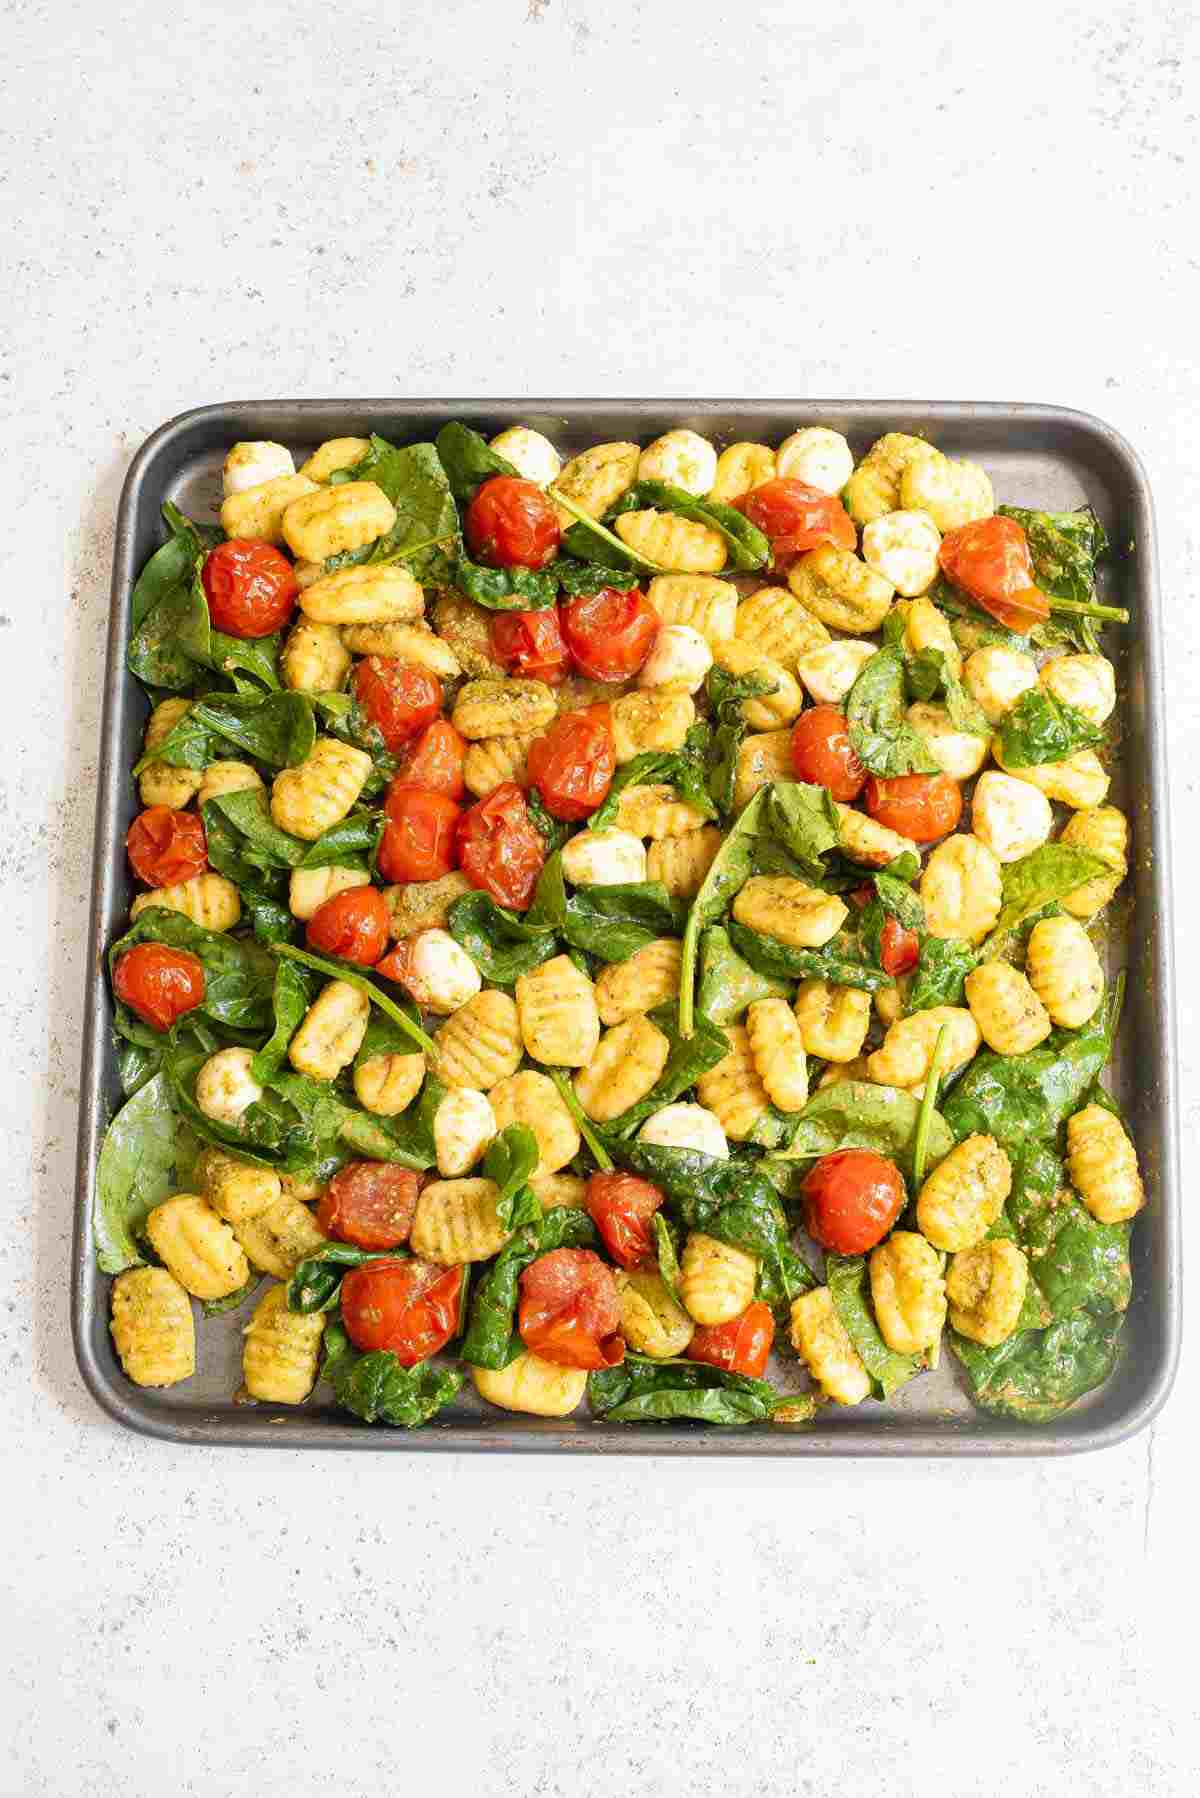 A full sheet pan with baked gnocchi, cherry tomatoes, and spinach, ready to be served.